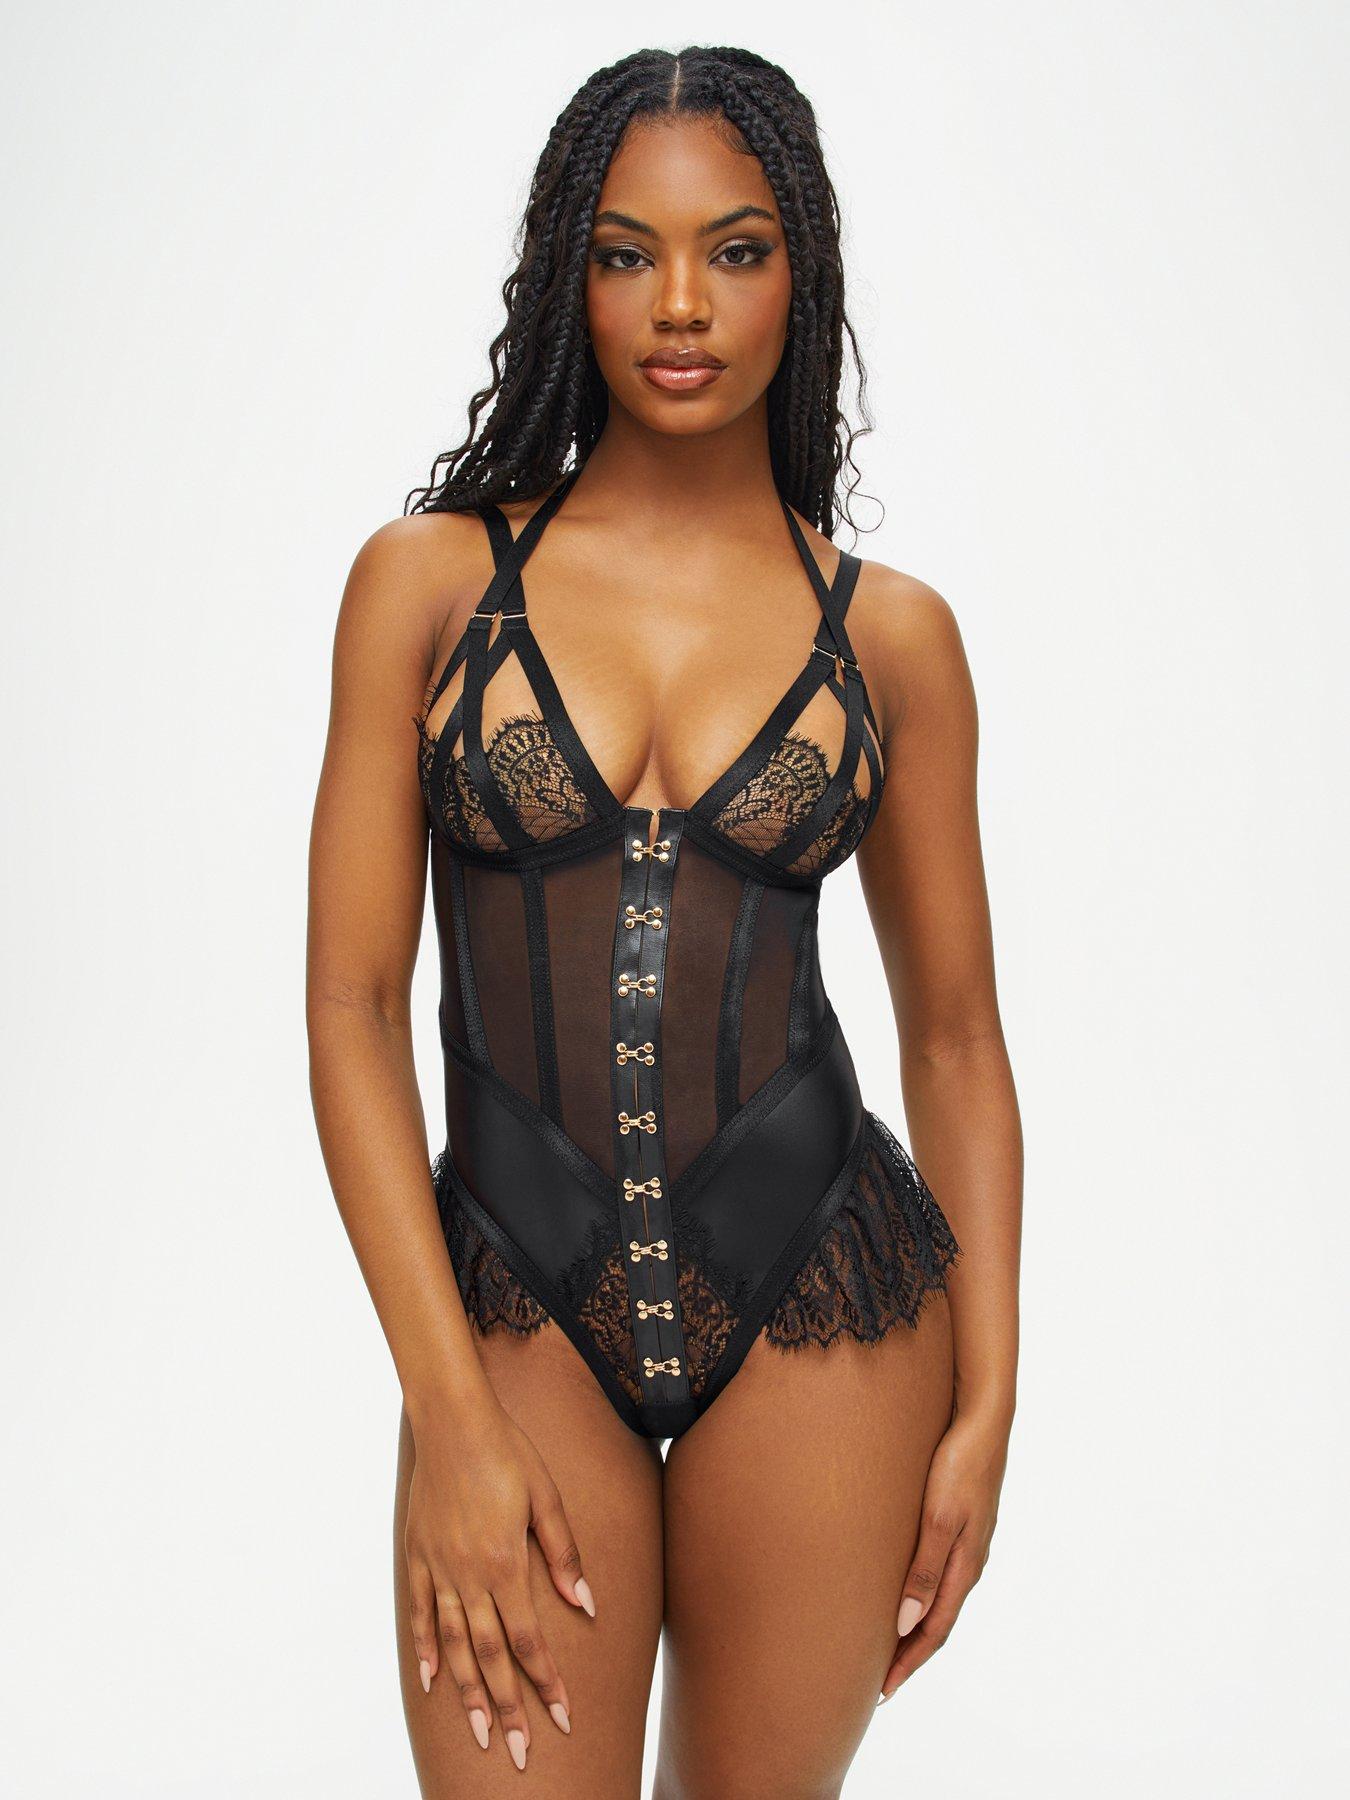 Plus Size 20-22 Sexy Black Lace Strappy Cut Out Bodysuit Teddy G-String  Lingerie